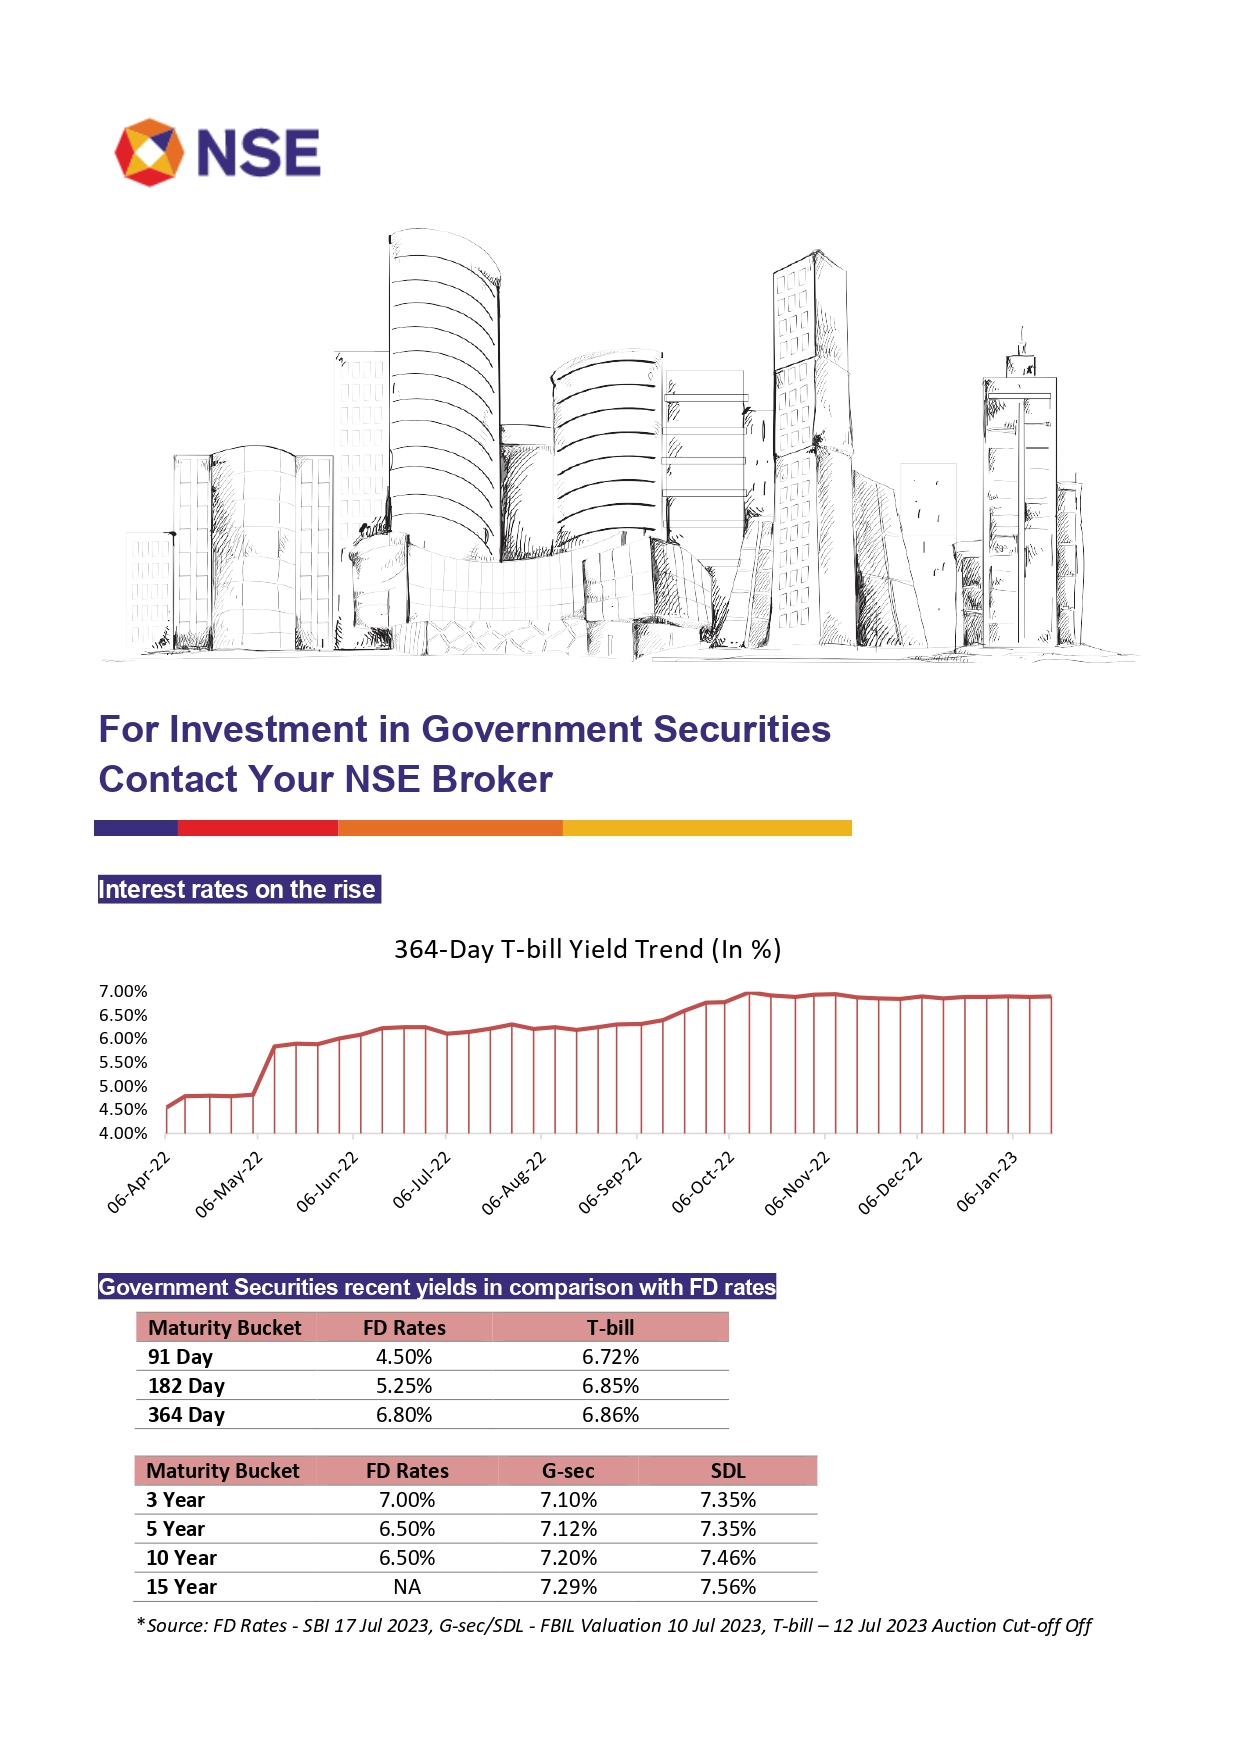 Investment in Government Securities